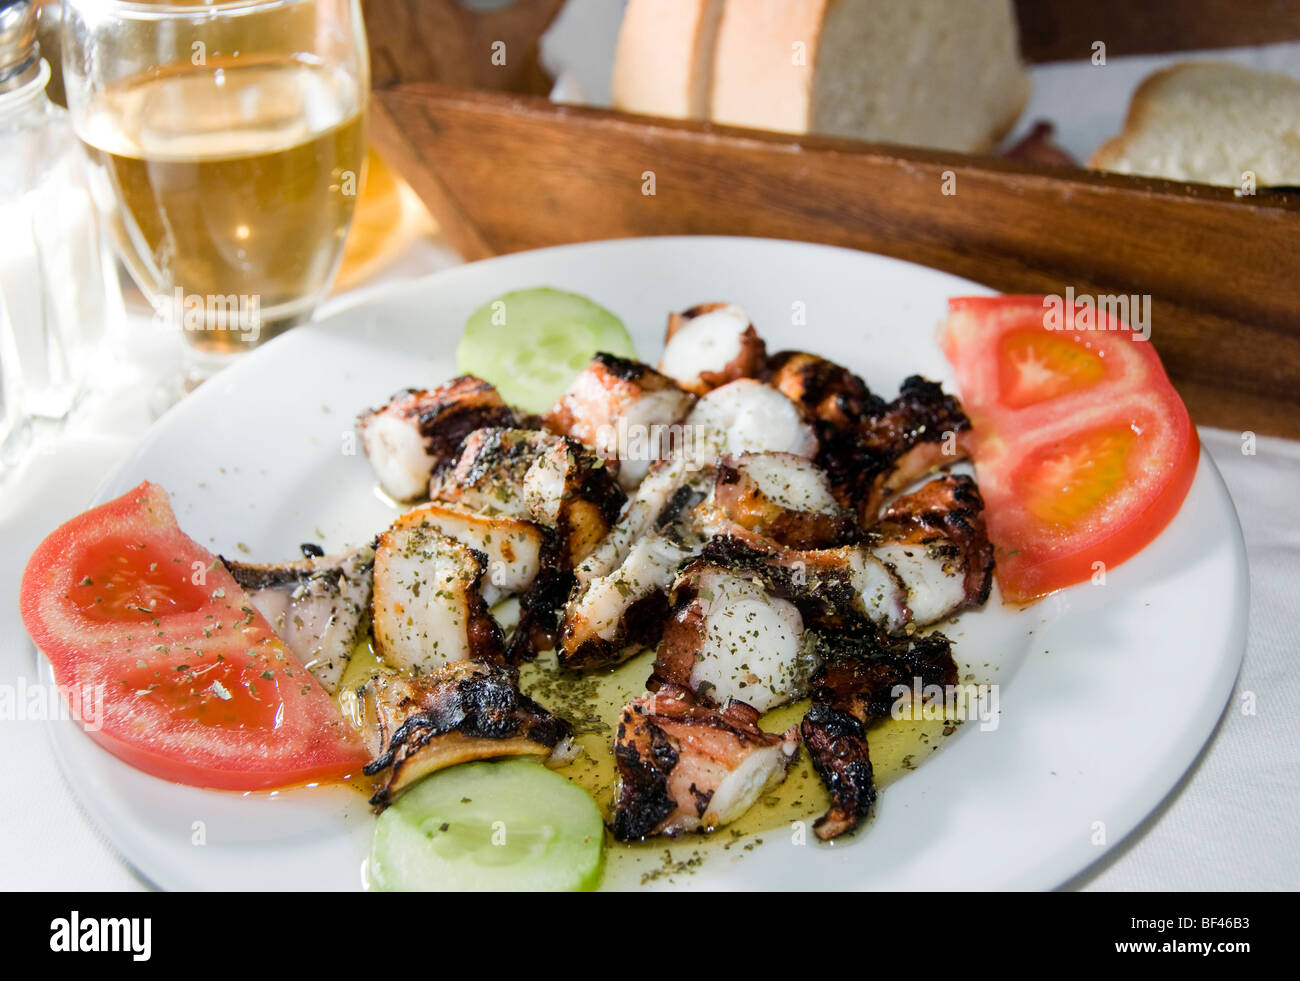 greece greek food octopus restaurant taverna grilled marinated plate specialty photograph santorini table wine home made house w Stock Photo